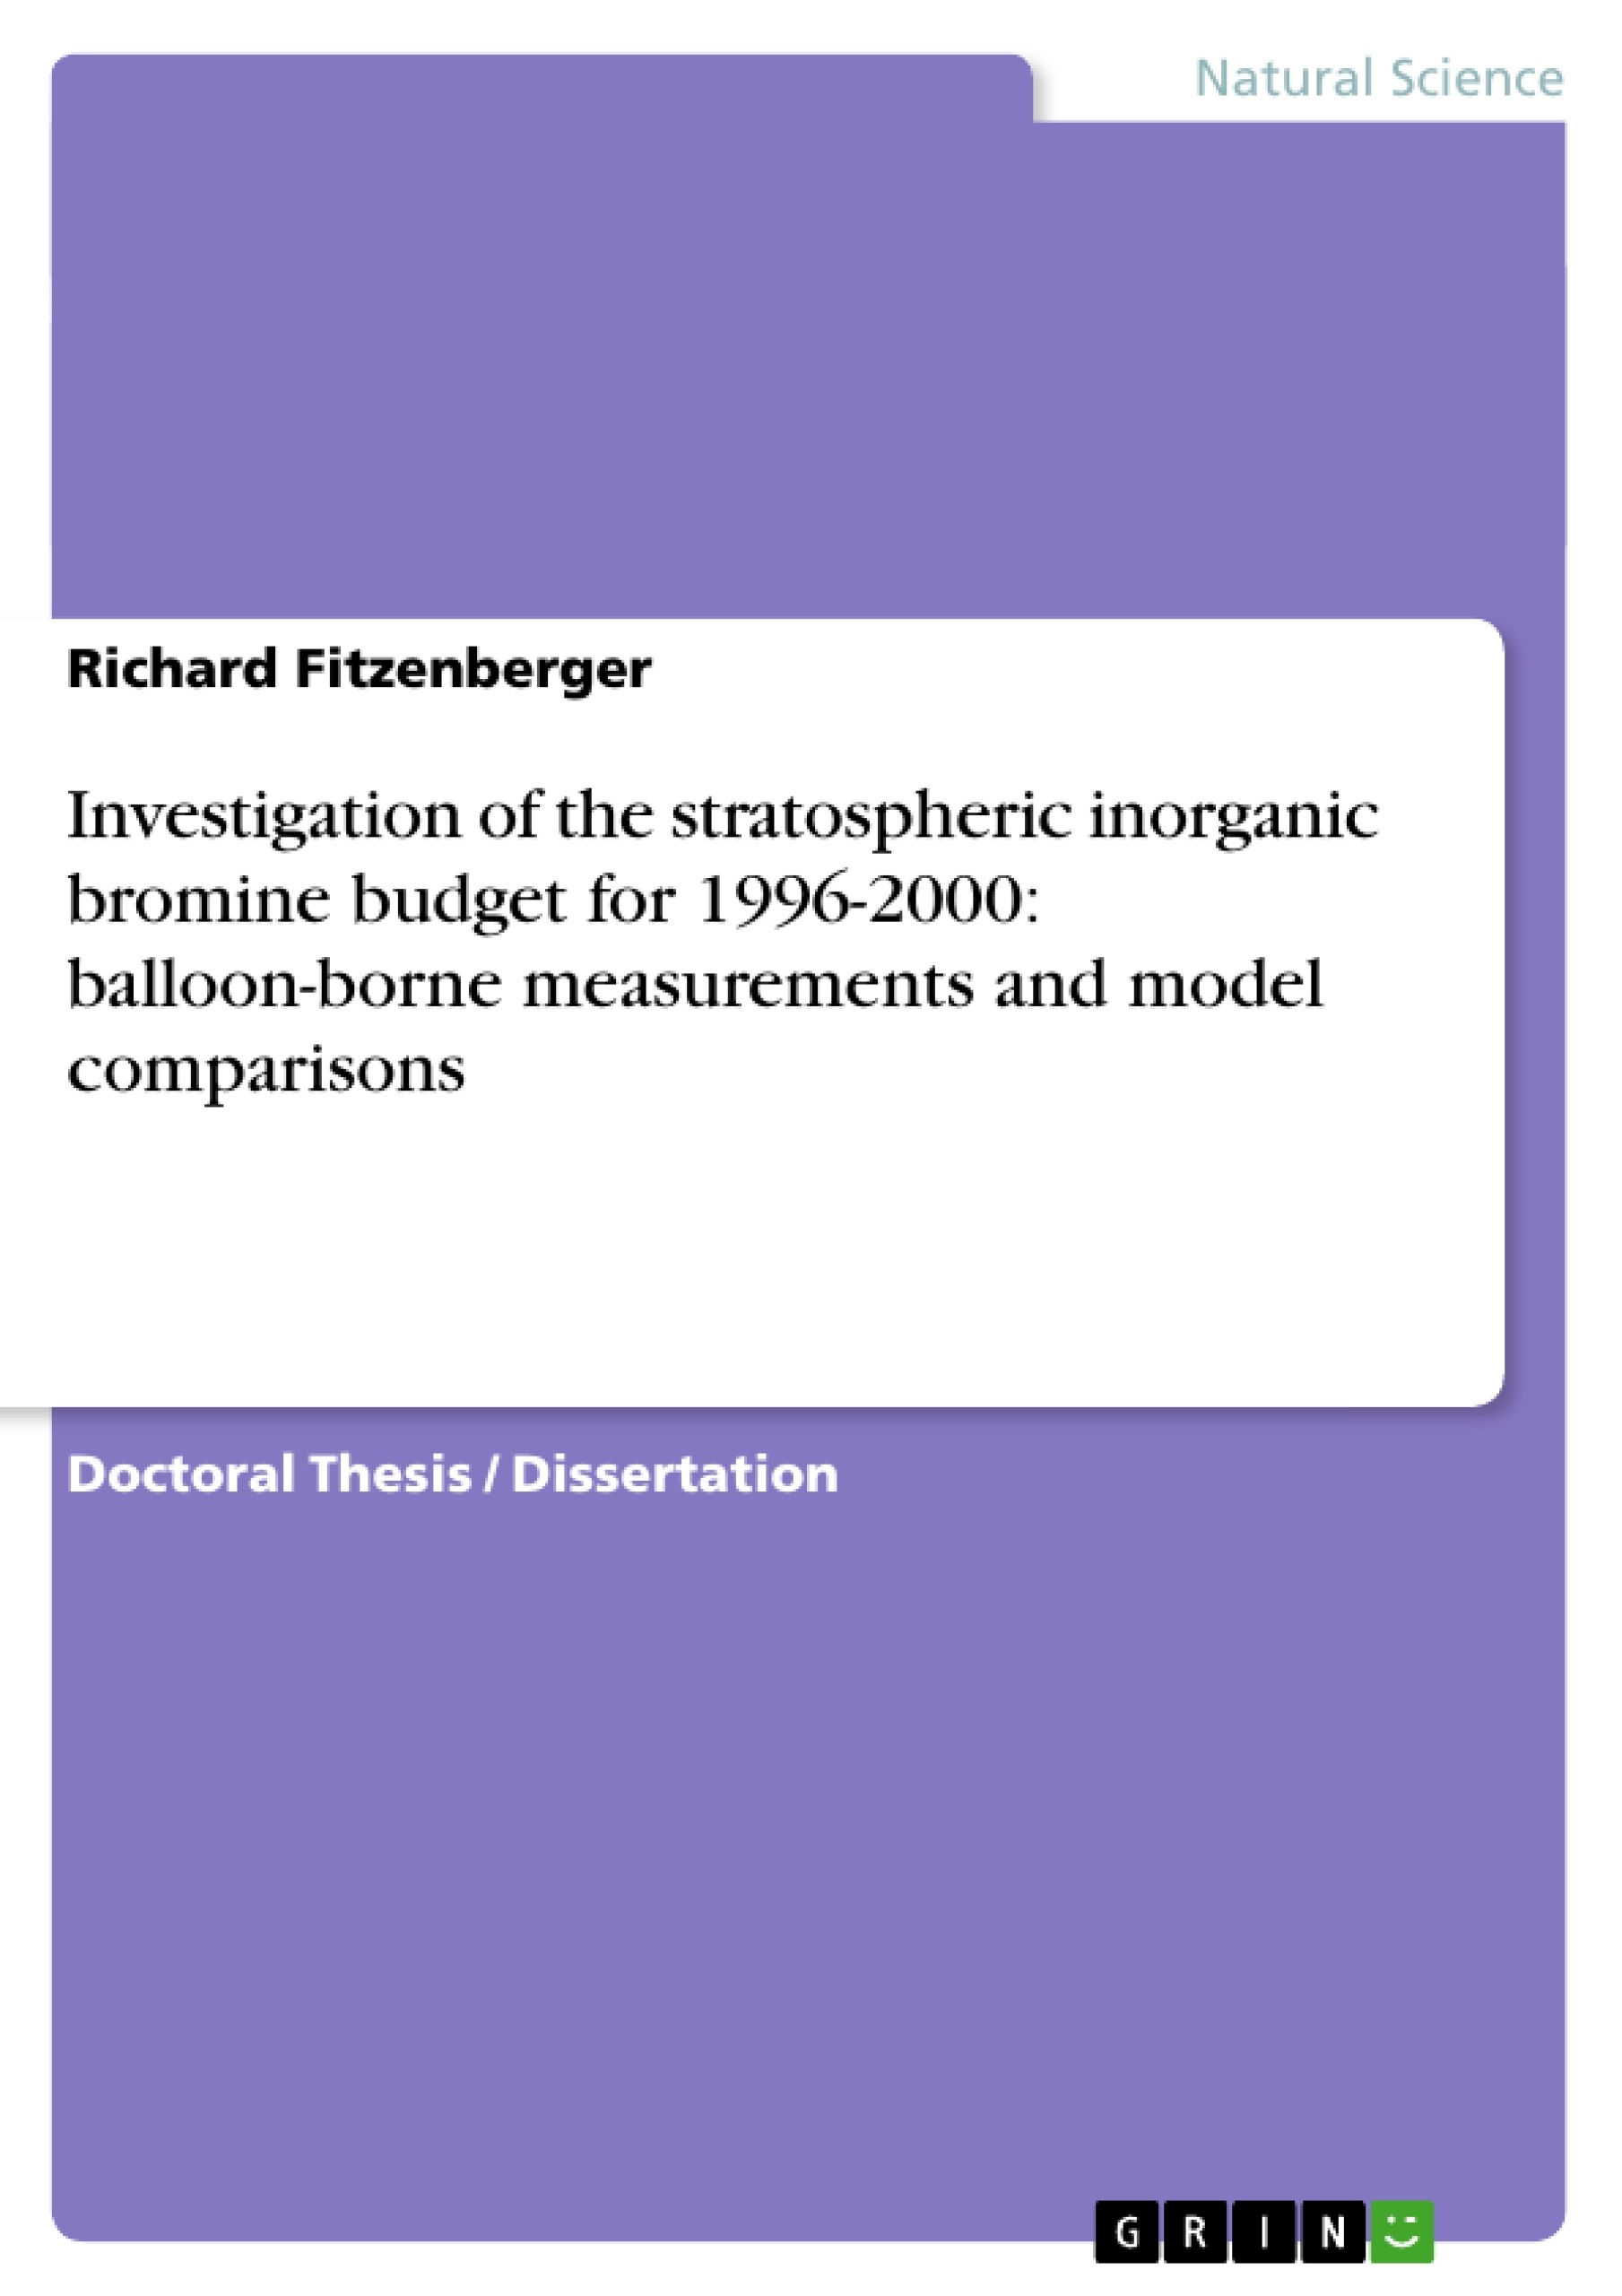 Titre: Investigation of the stratospheric inorganic bromine budget for 1996-2000: balloon-borne measurements and model comparisons